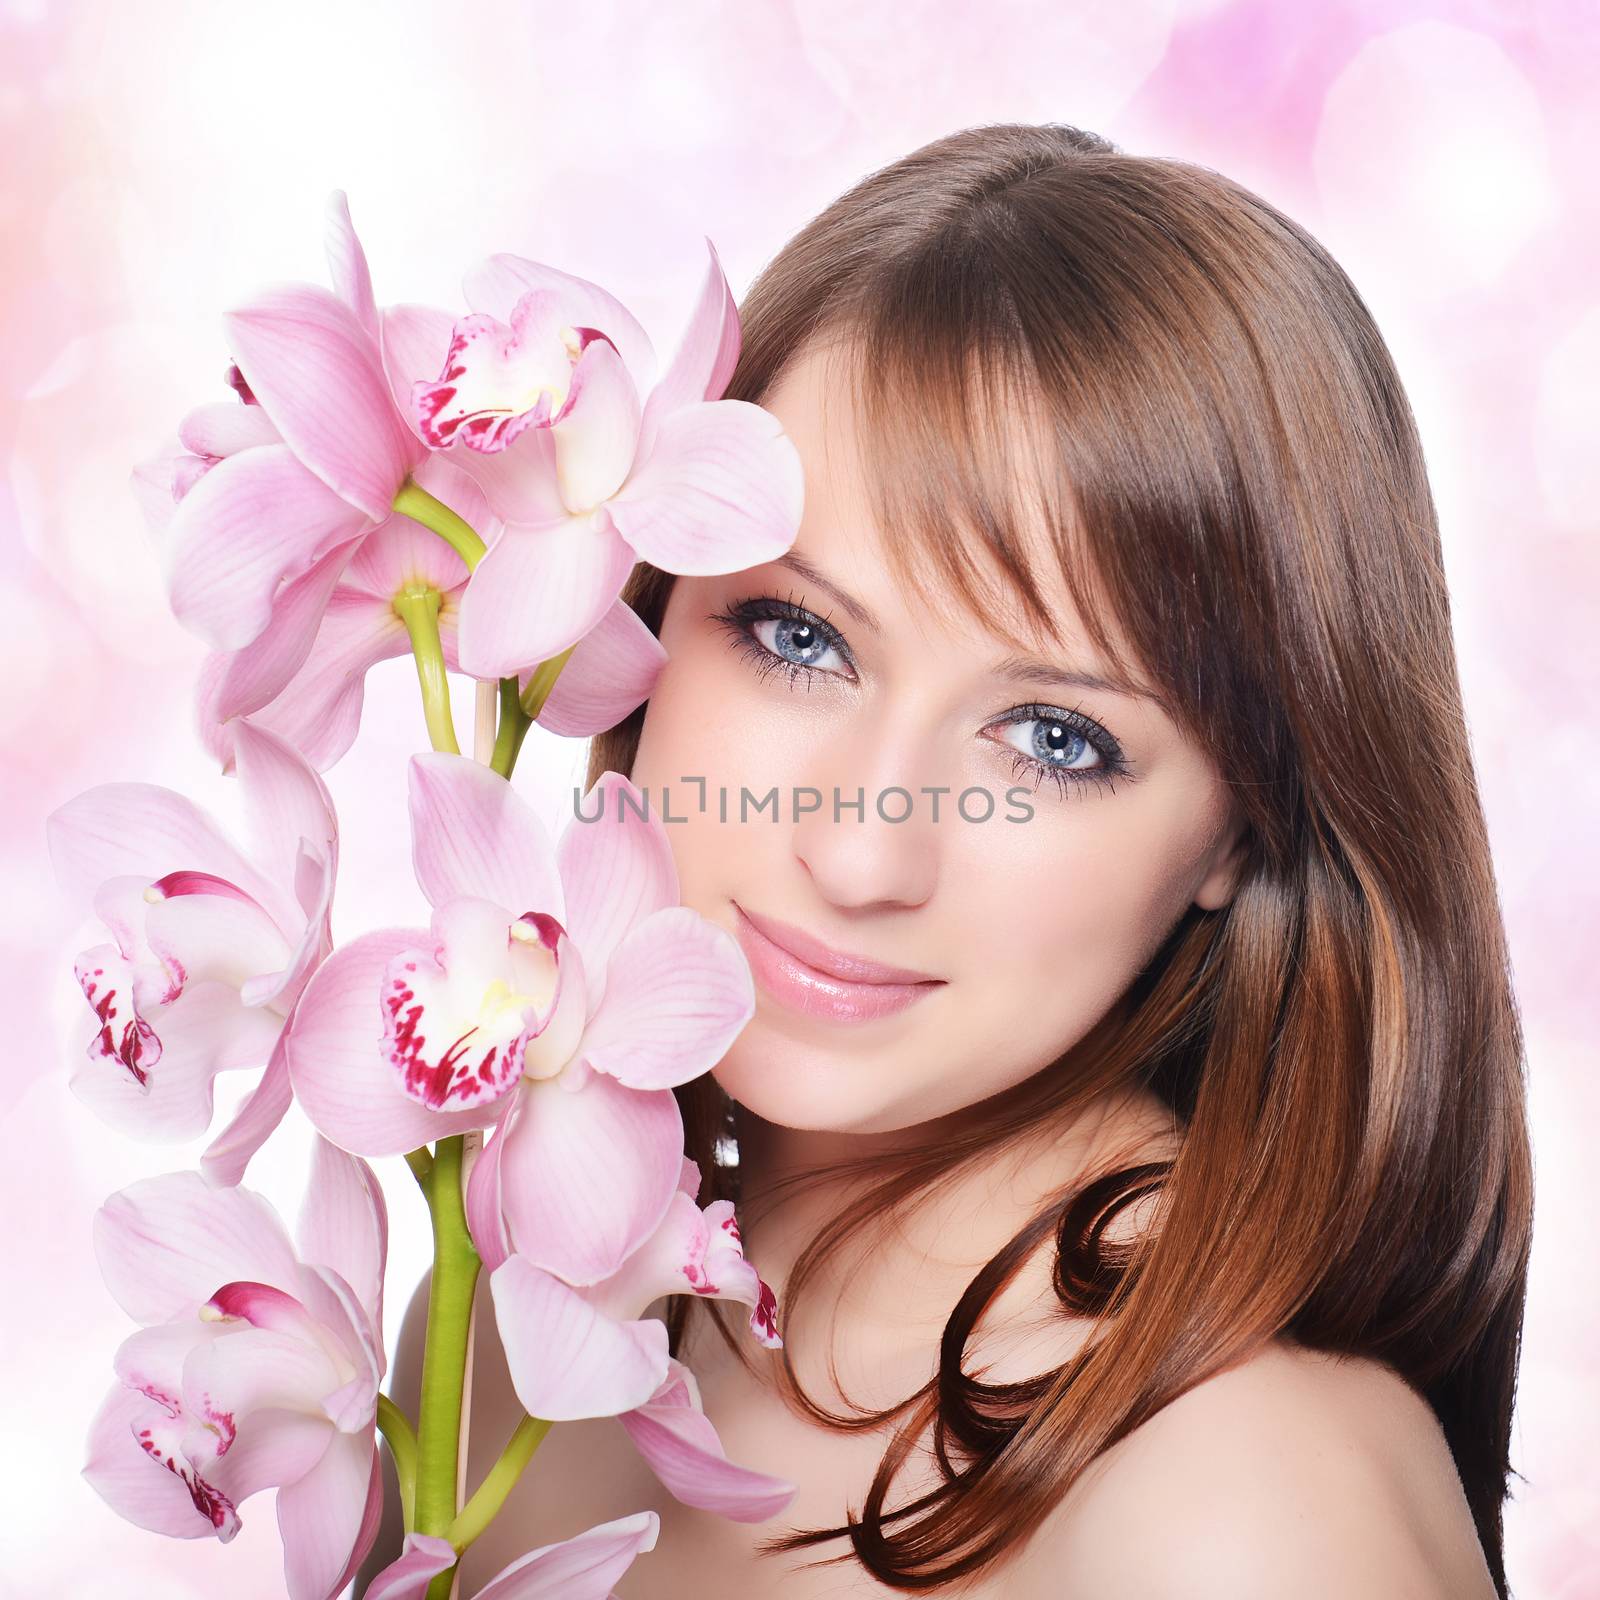 Beautiful Girl With Orchid Flowers